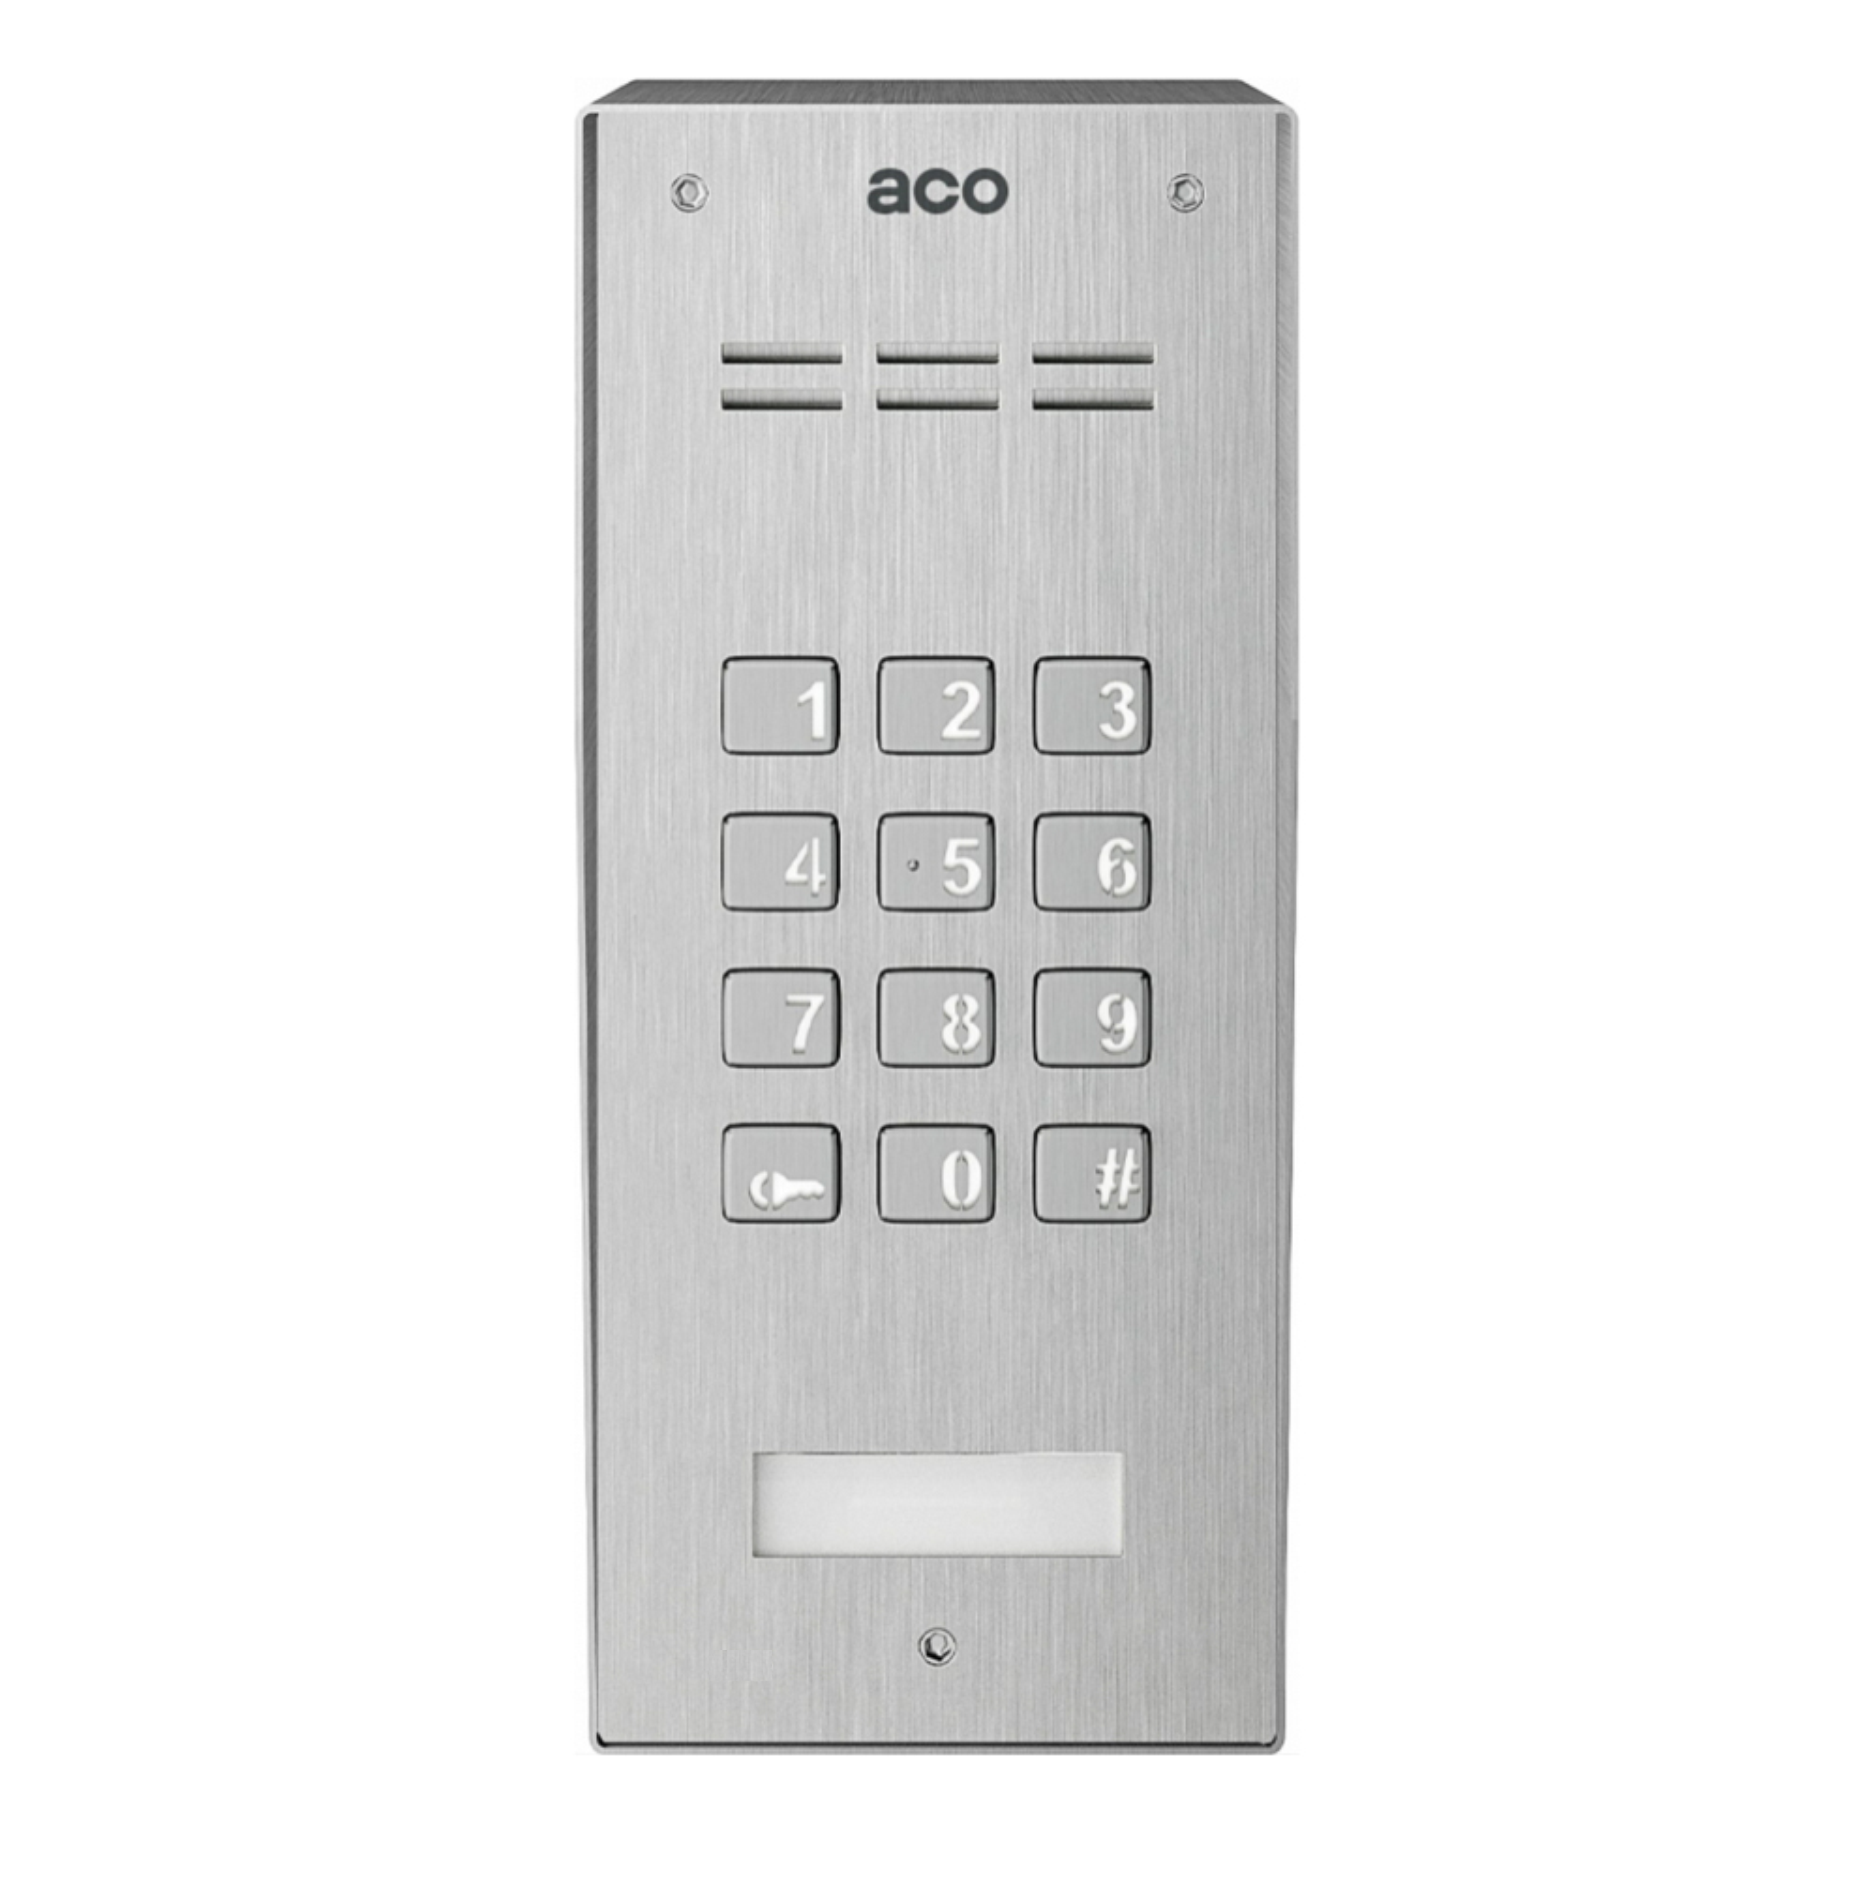 FAM-P-ZSACC NT Digital door entry panel with key fob reader and code lock